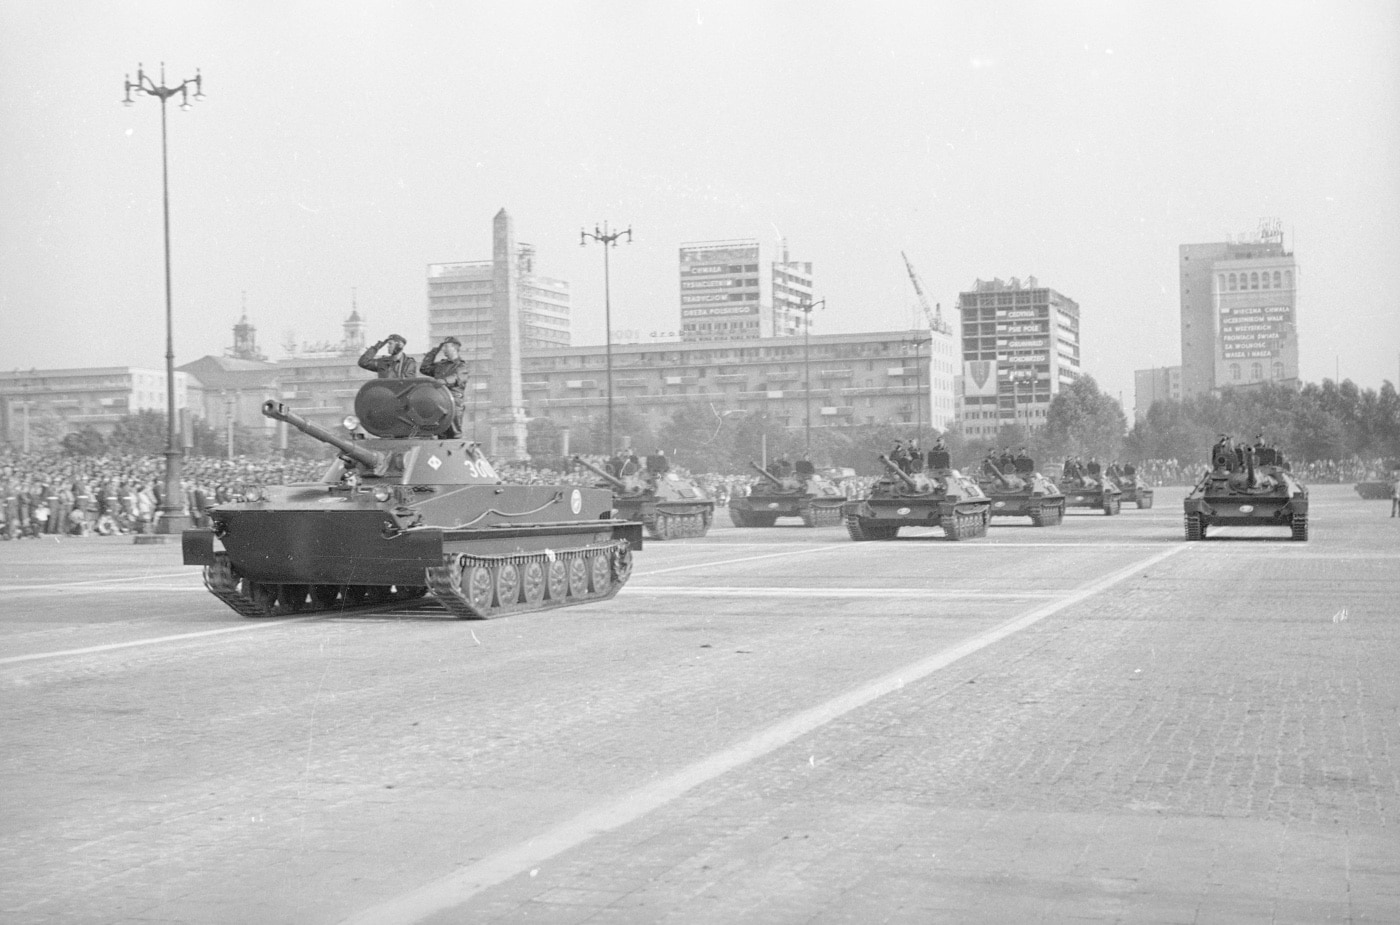 warsaw pact pt-76 on parade 1966